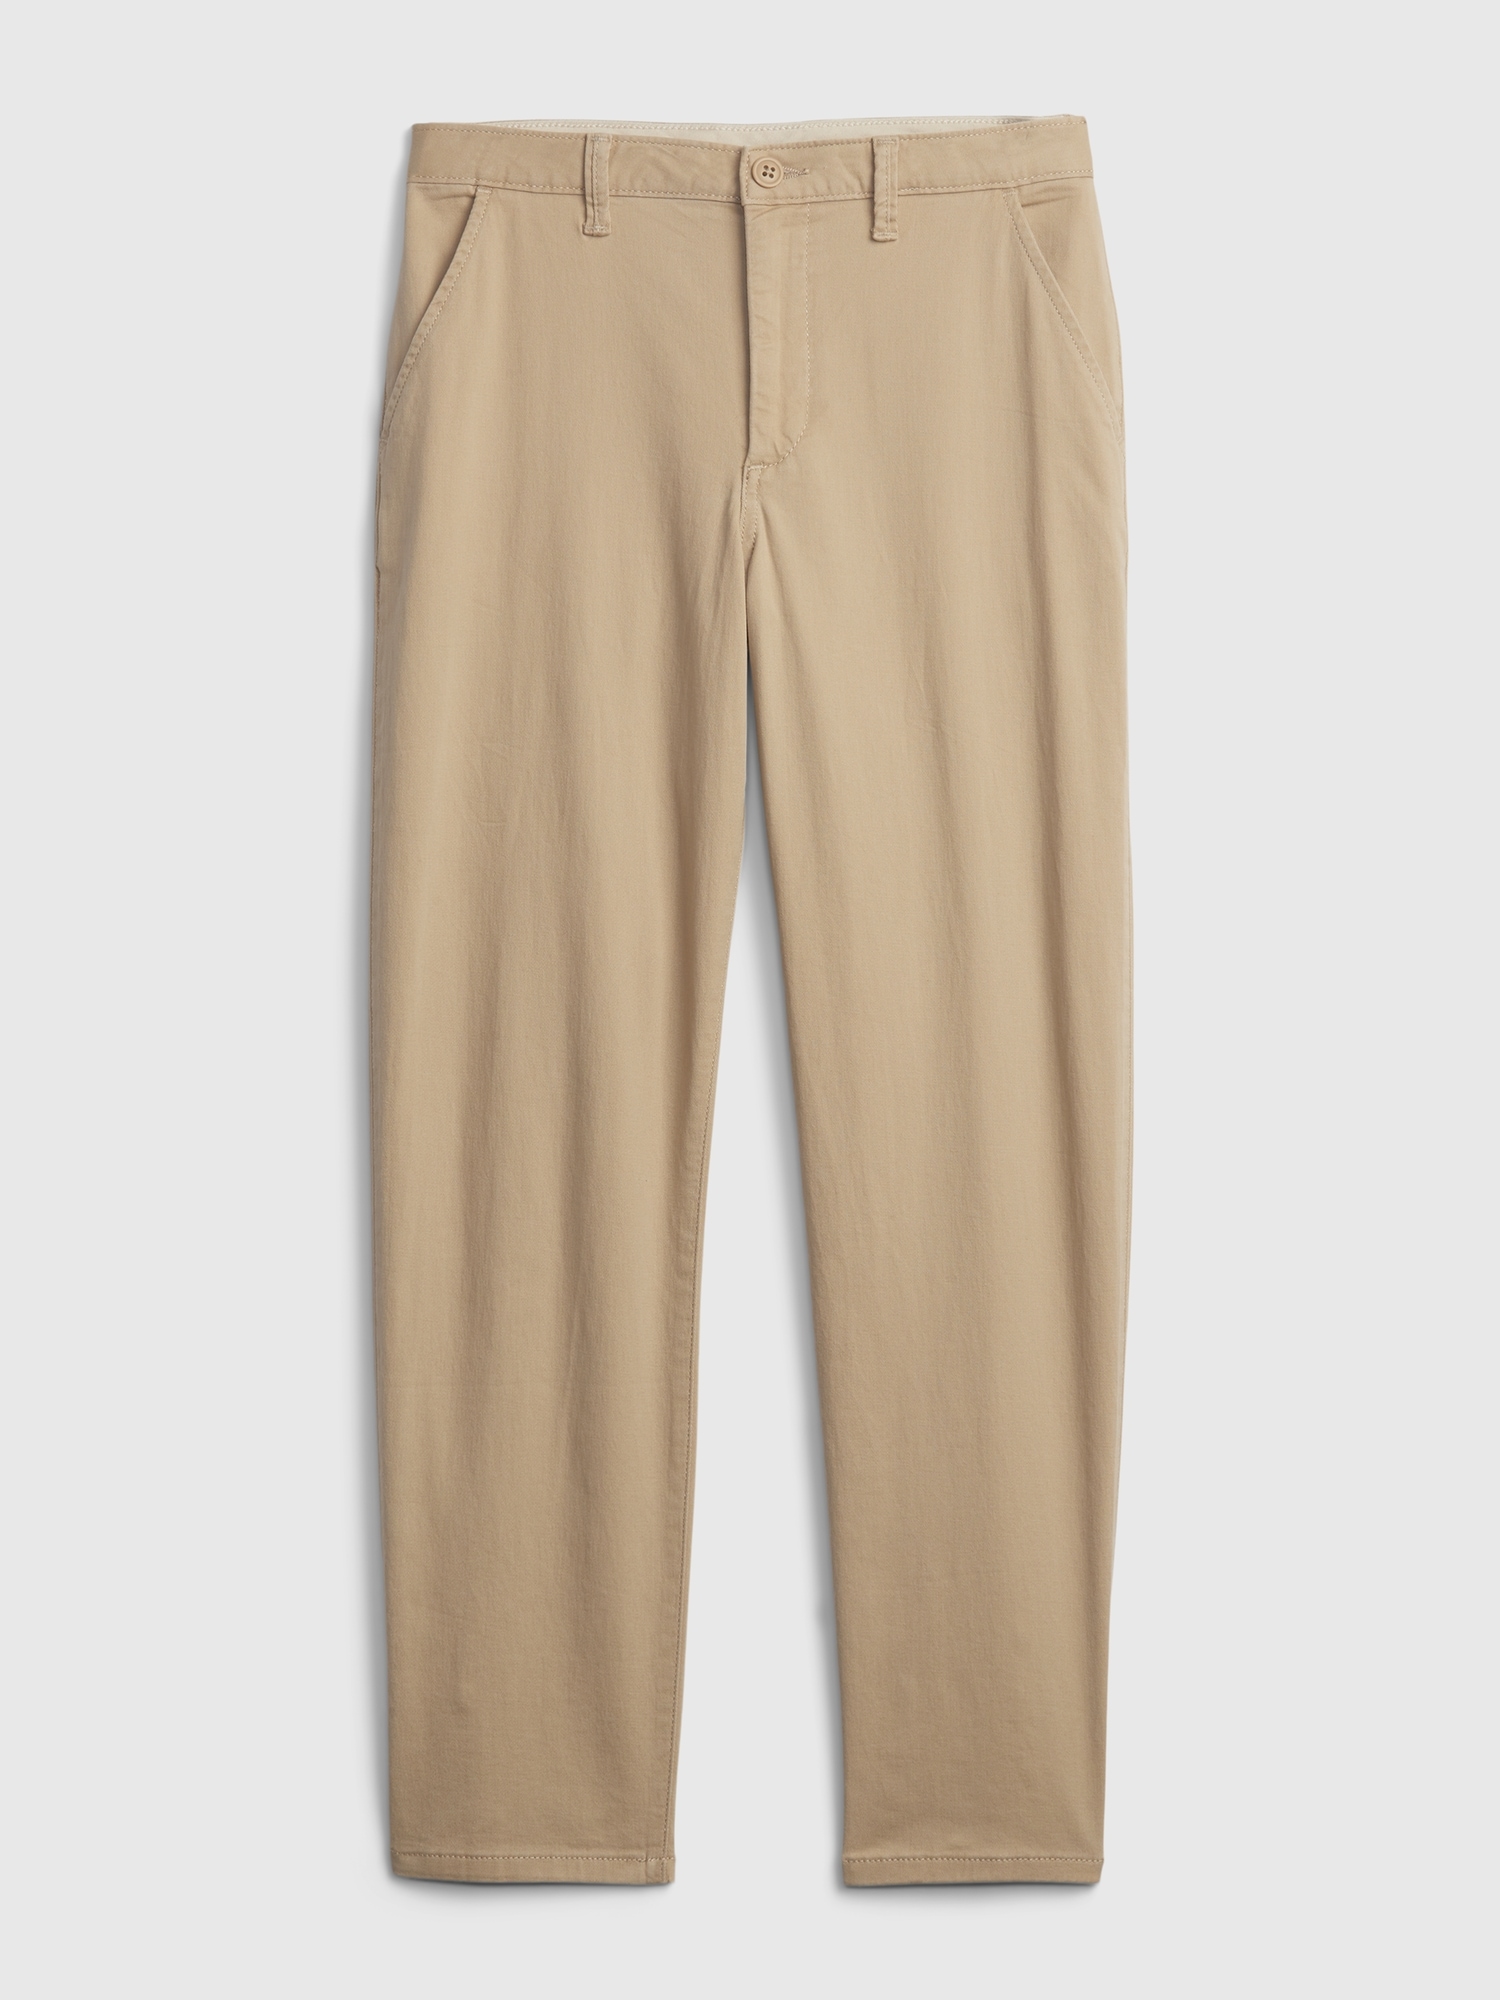 Teen Loose Fit Khakis with Washwell | Gap